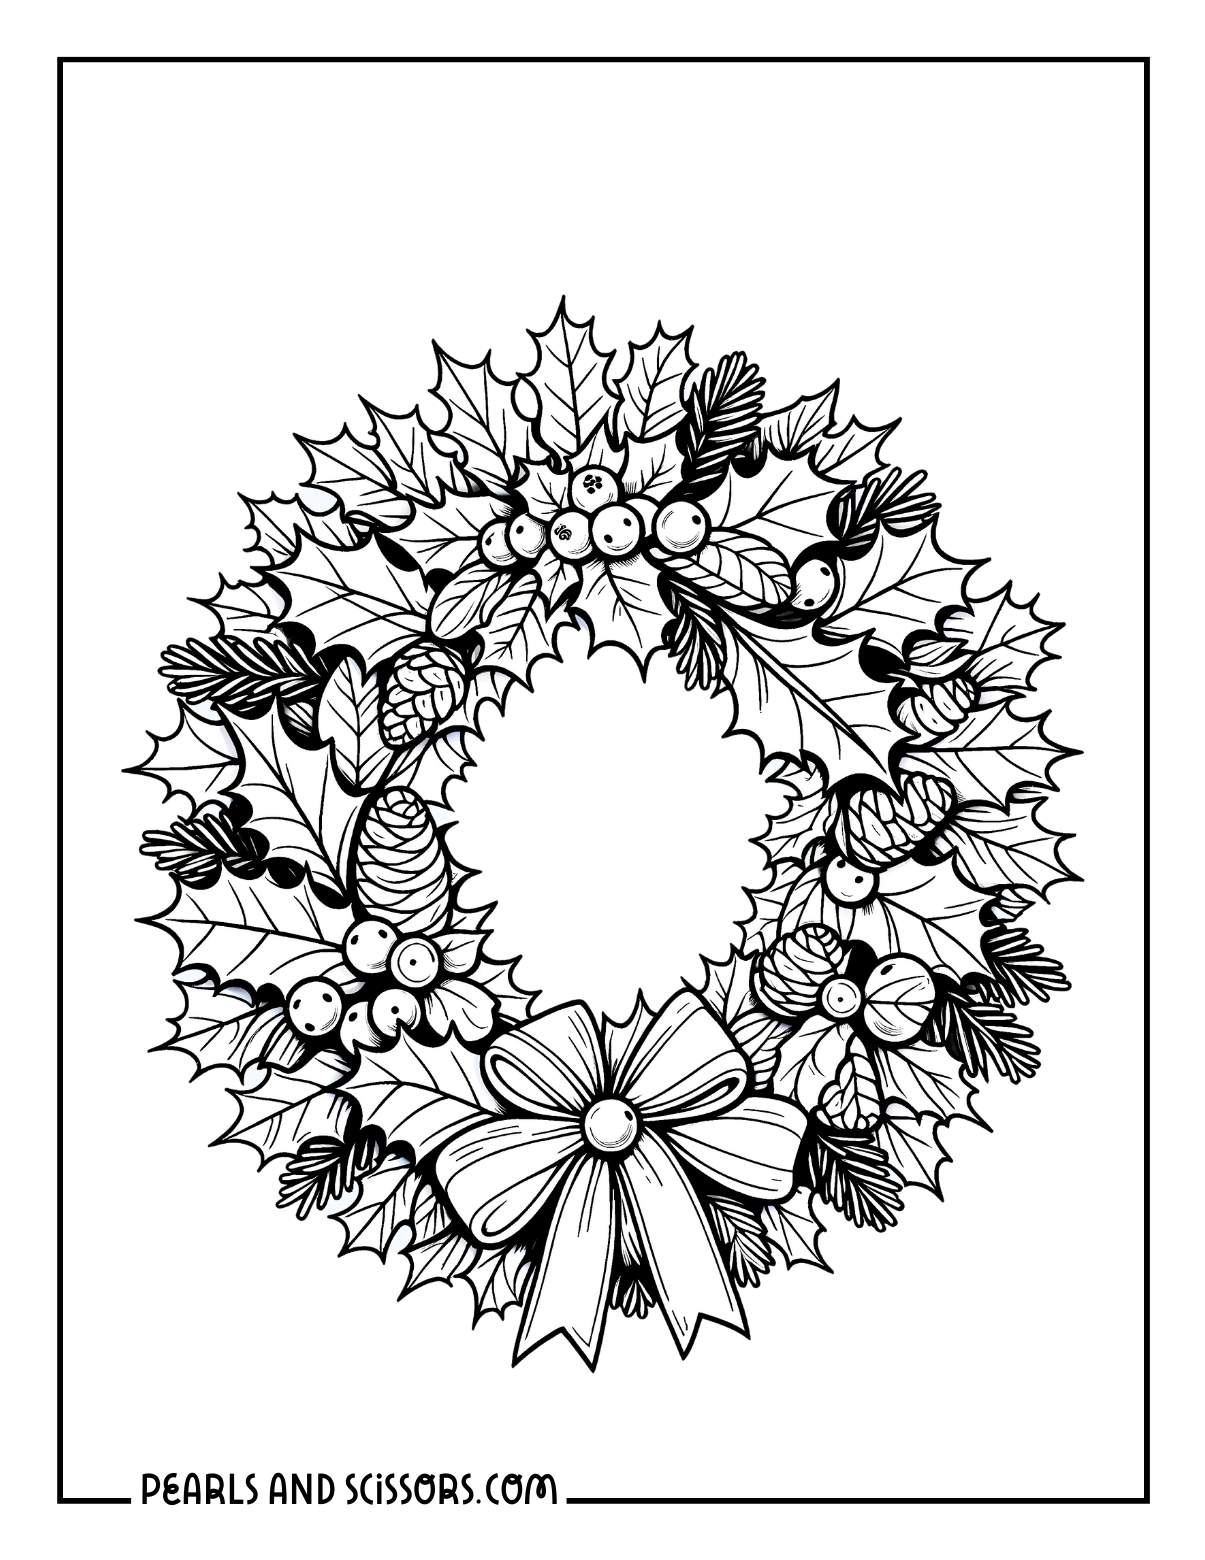 Christmas wreath with mistletoe design details coloring page for adults.